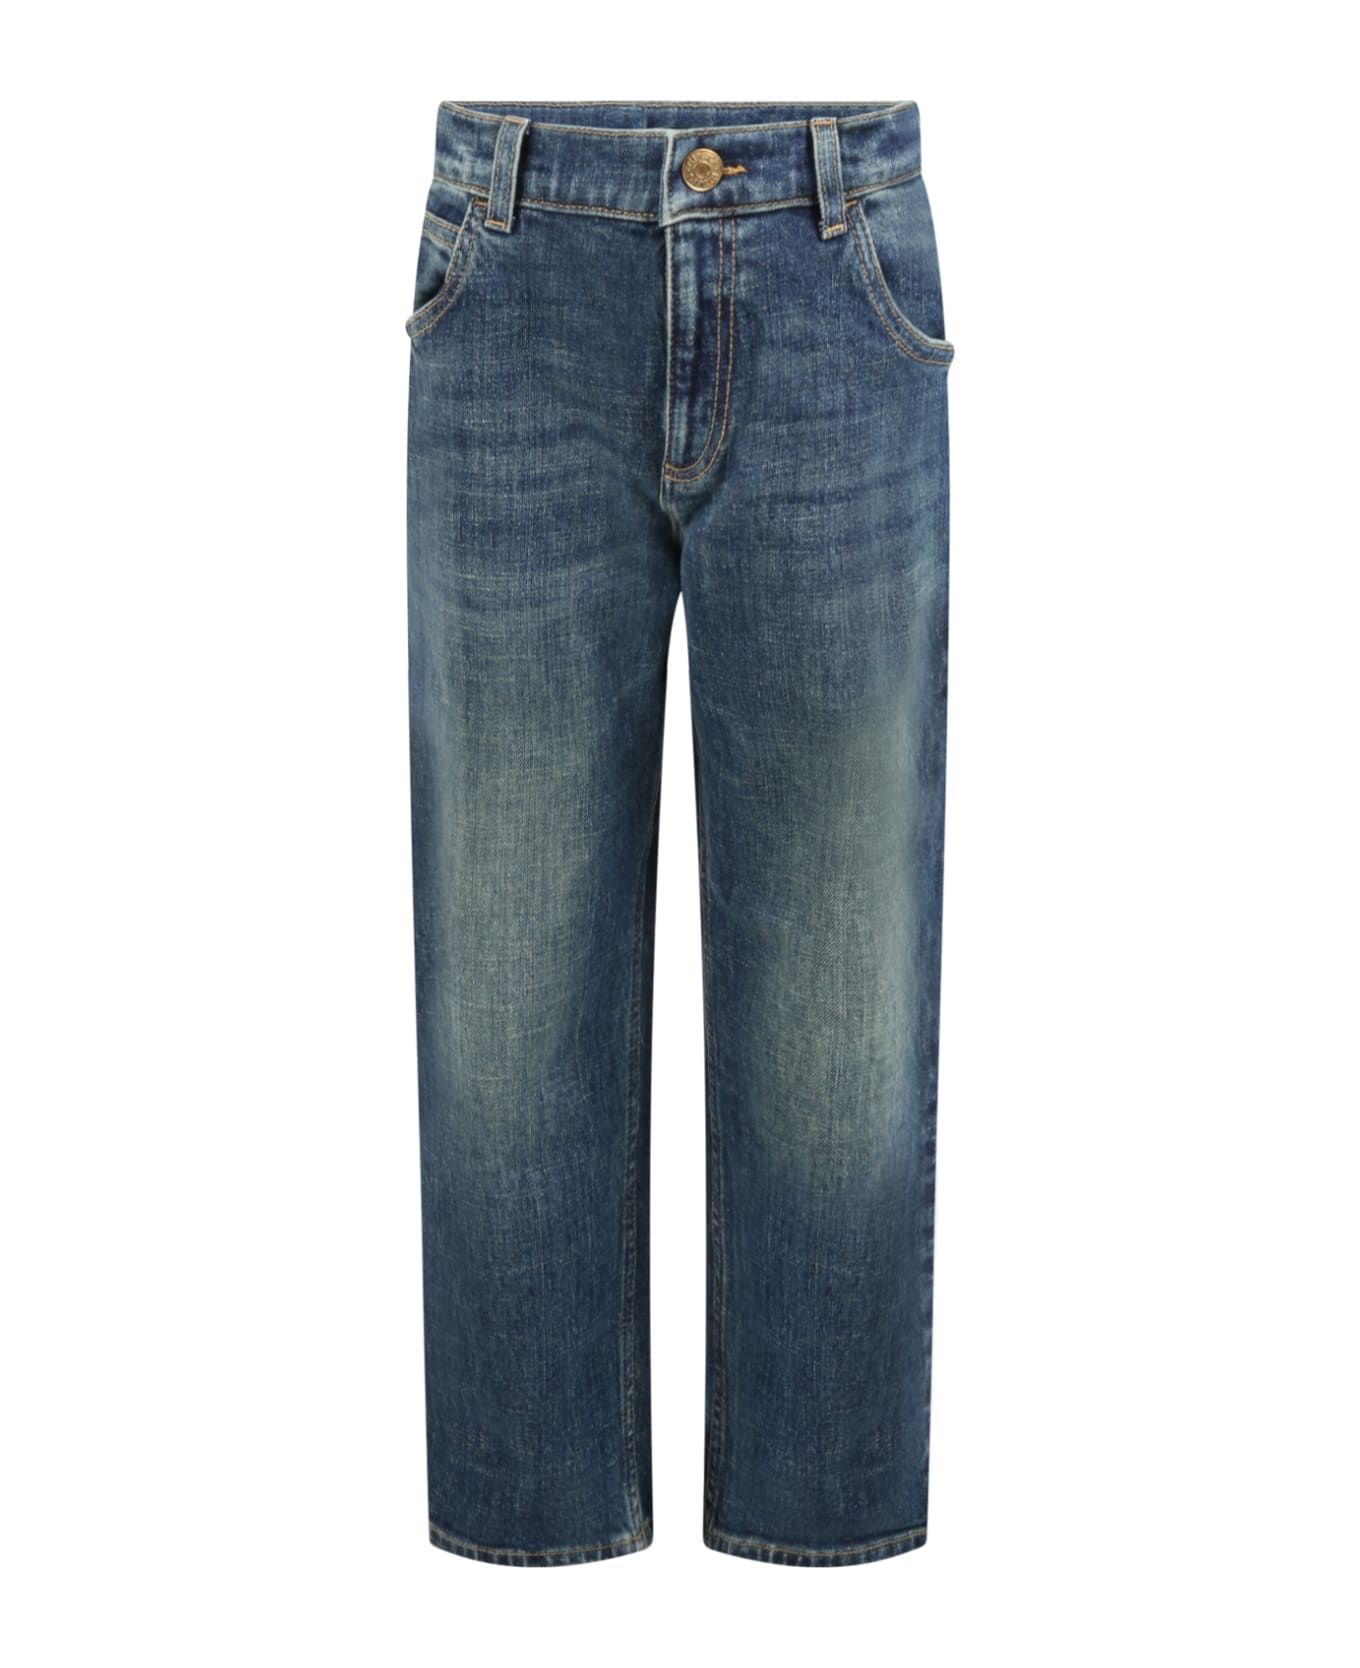 Gucci Jeans Blue For Boy With Horsebit And Patch Logo - Denim